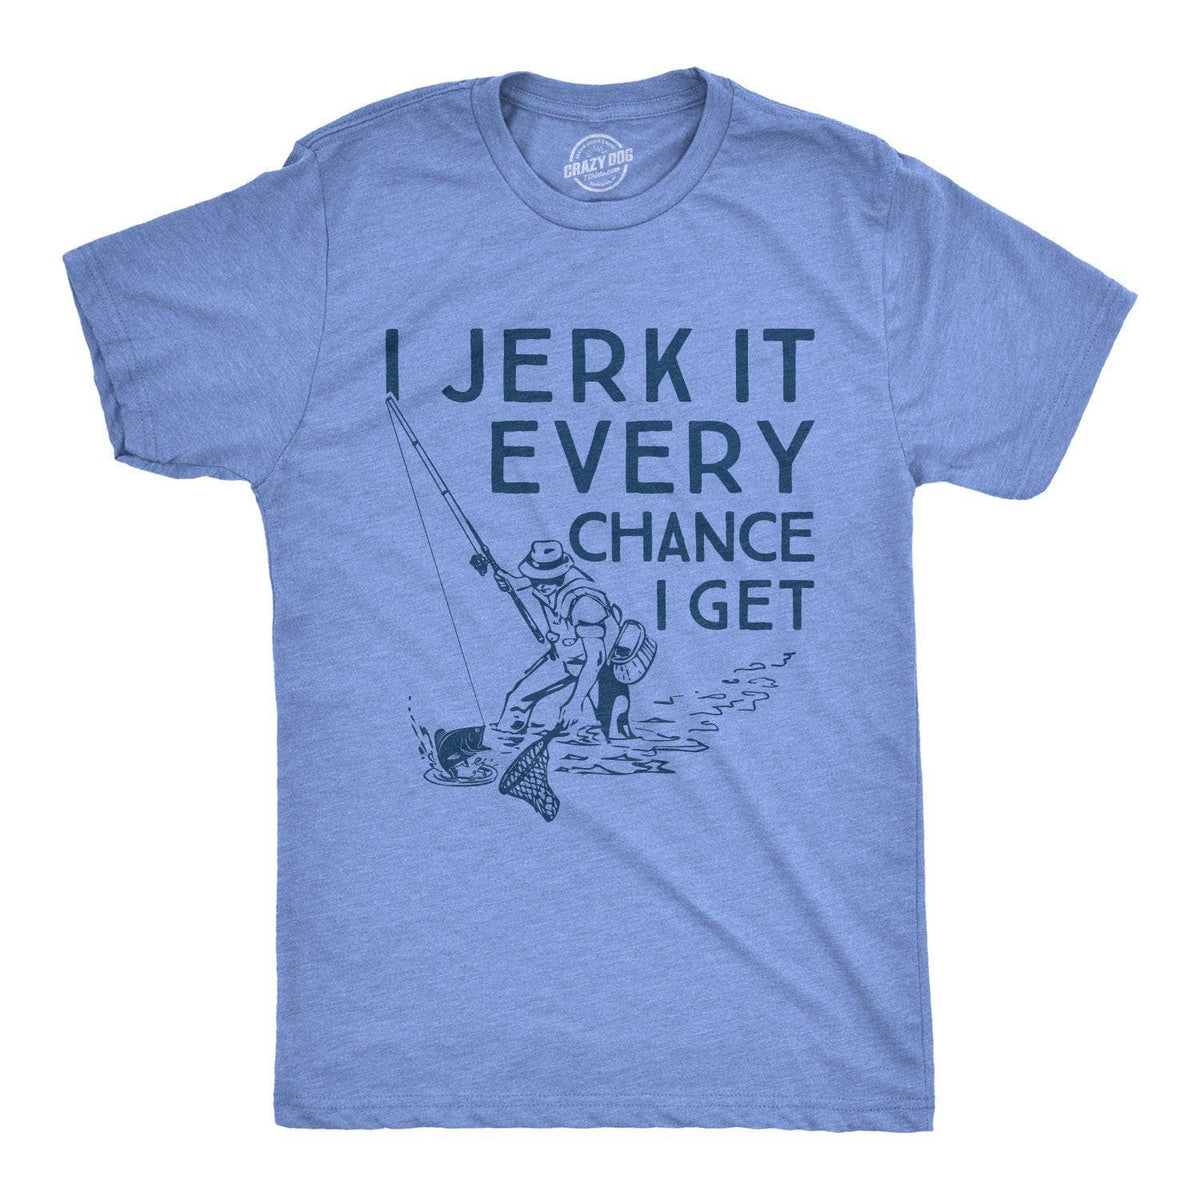 Crazy Dog T-Shirts Mens I Jerk It Every Chance I Get Funny Fishing Tee, Size: Small, Blue